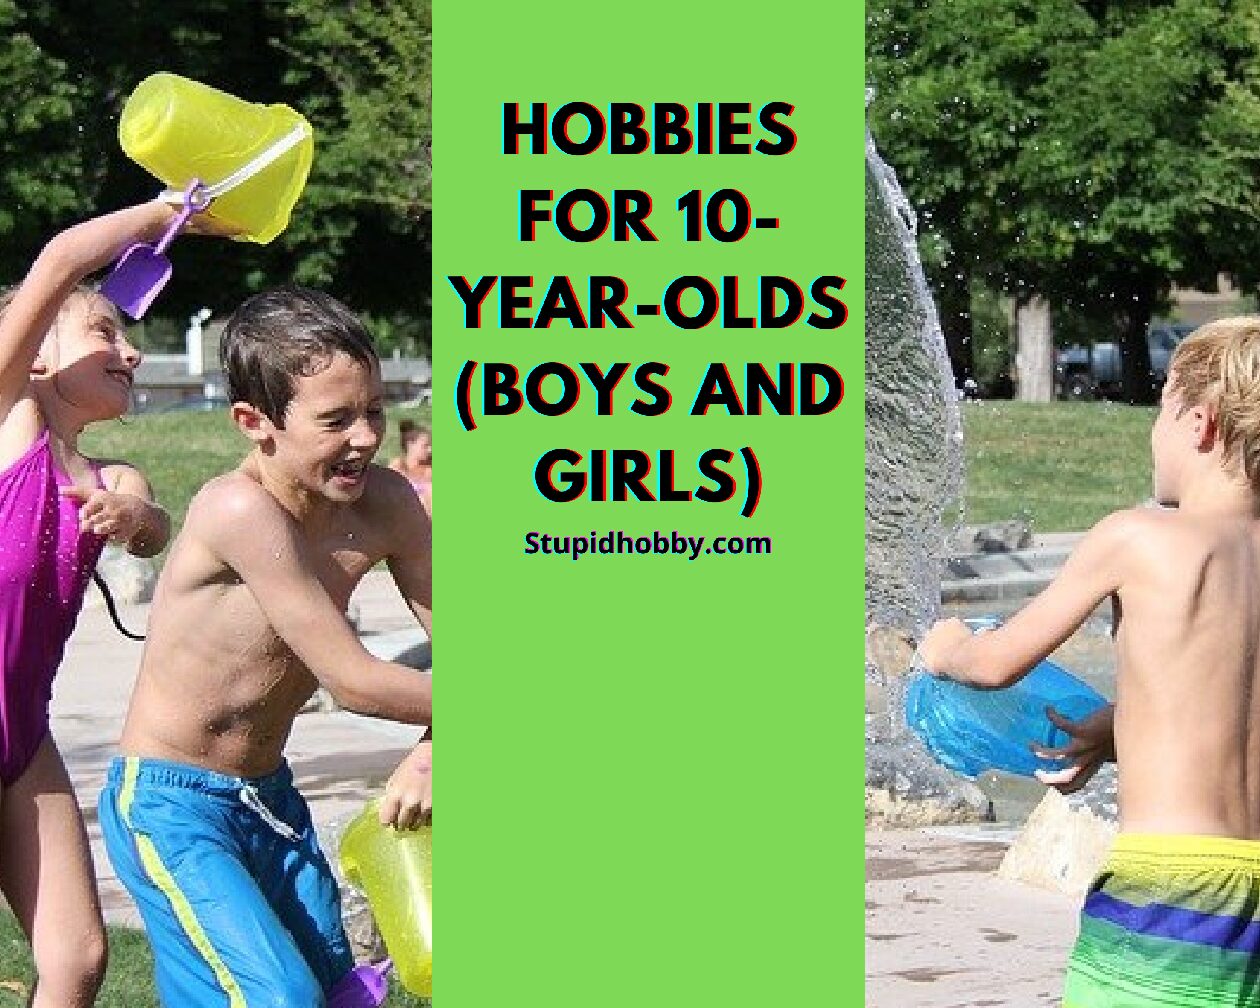 Hobbies For 10-Year-Olds (Boys and Girls)